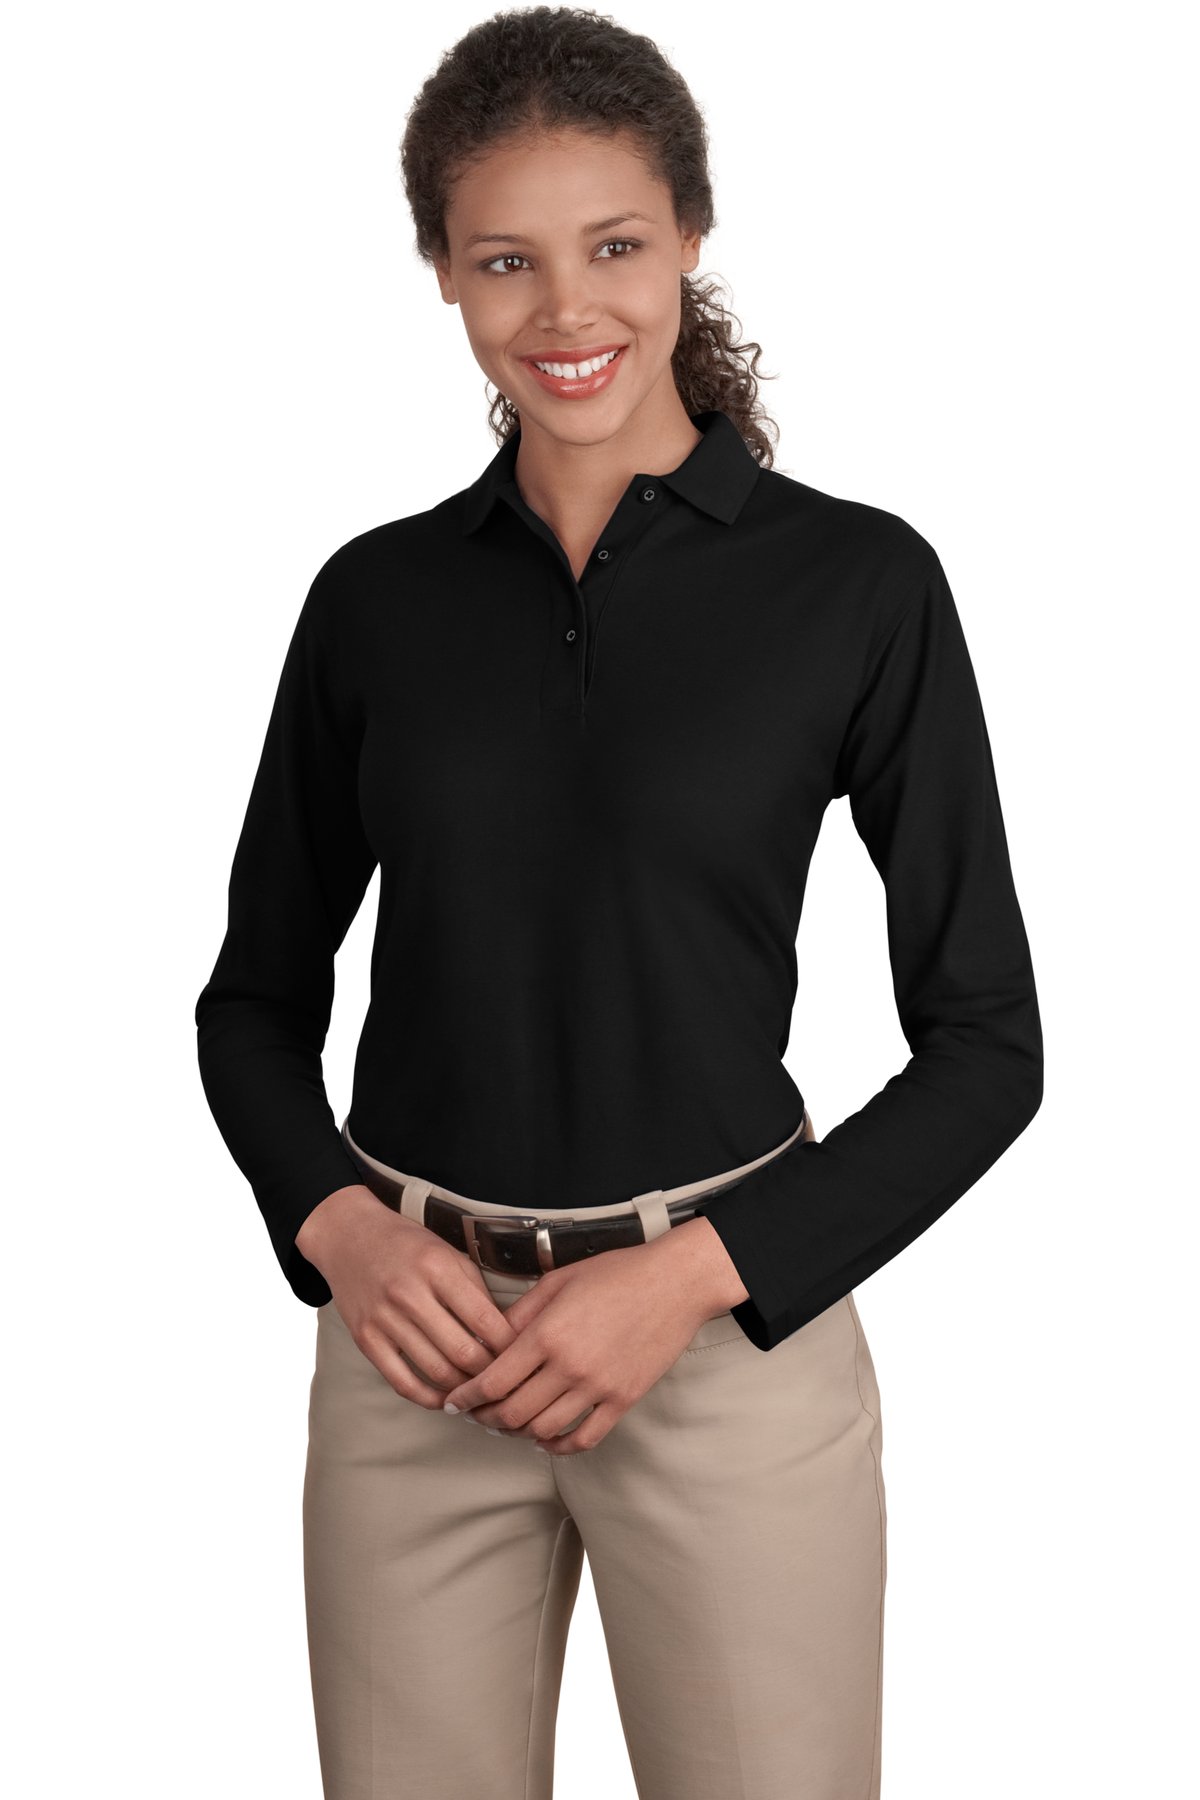 Port Authority Ladies Long Sleeve Silk Touch Polo - image 1 of 1